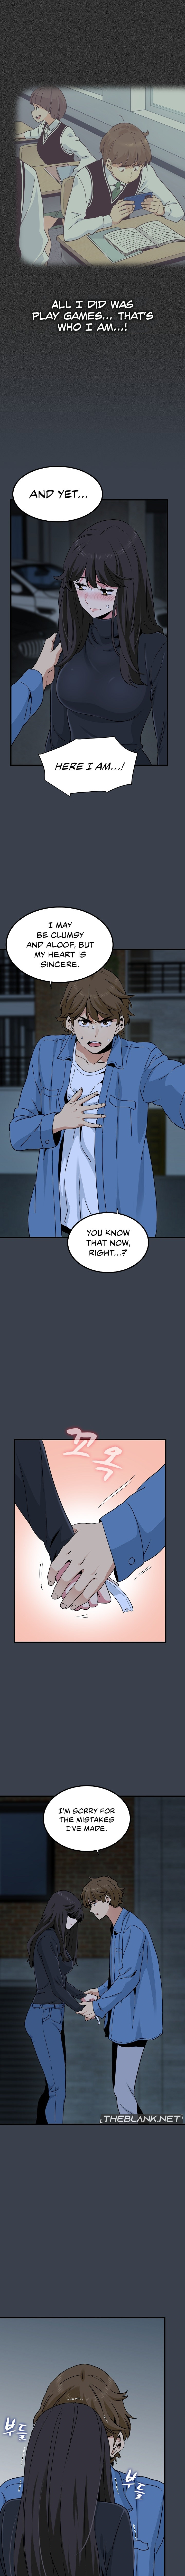 A Turning Point - Chapter 32 Page 6